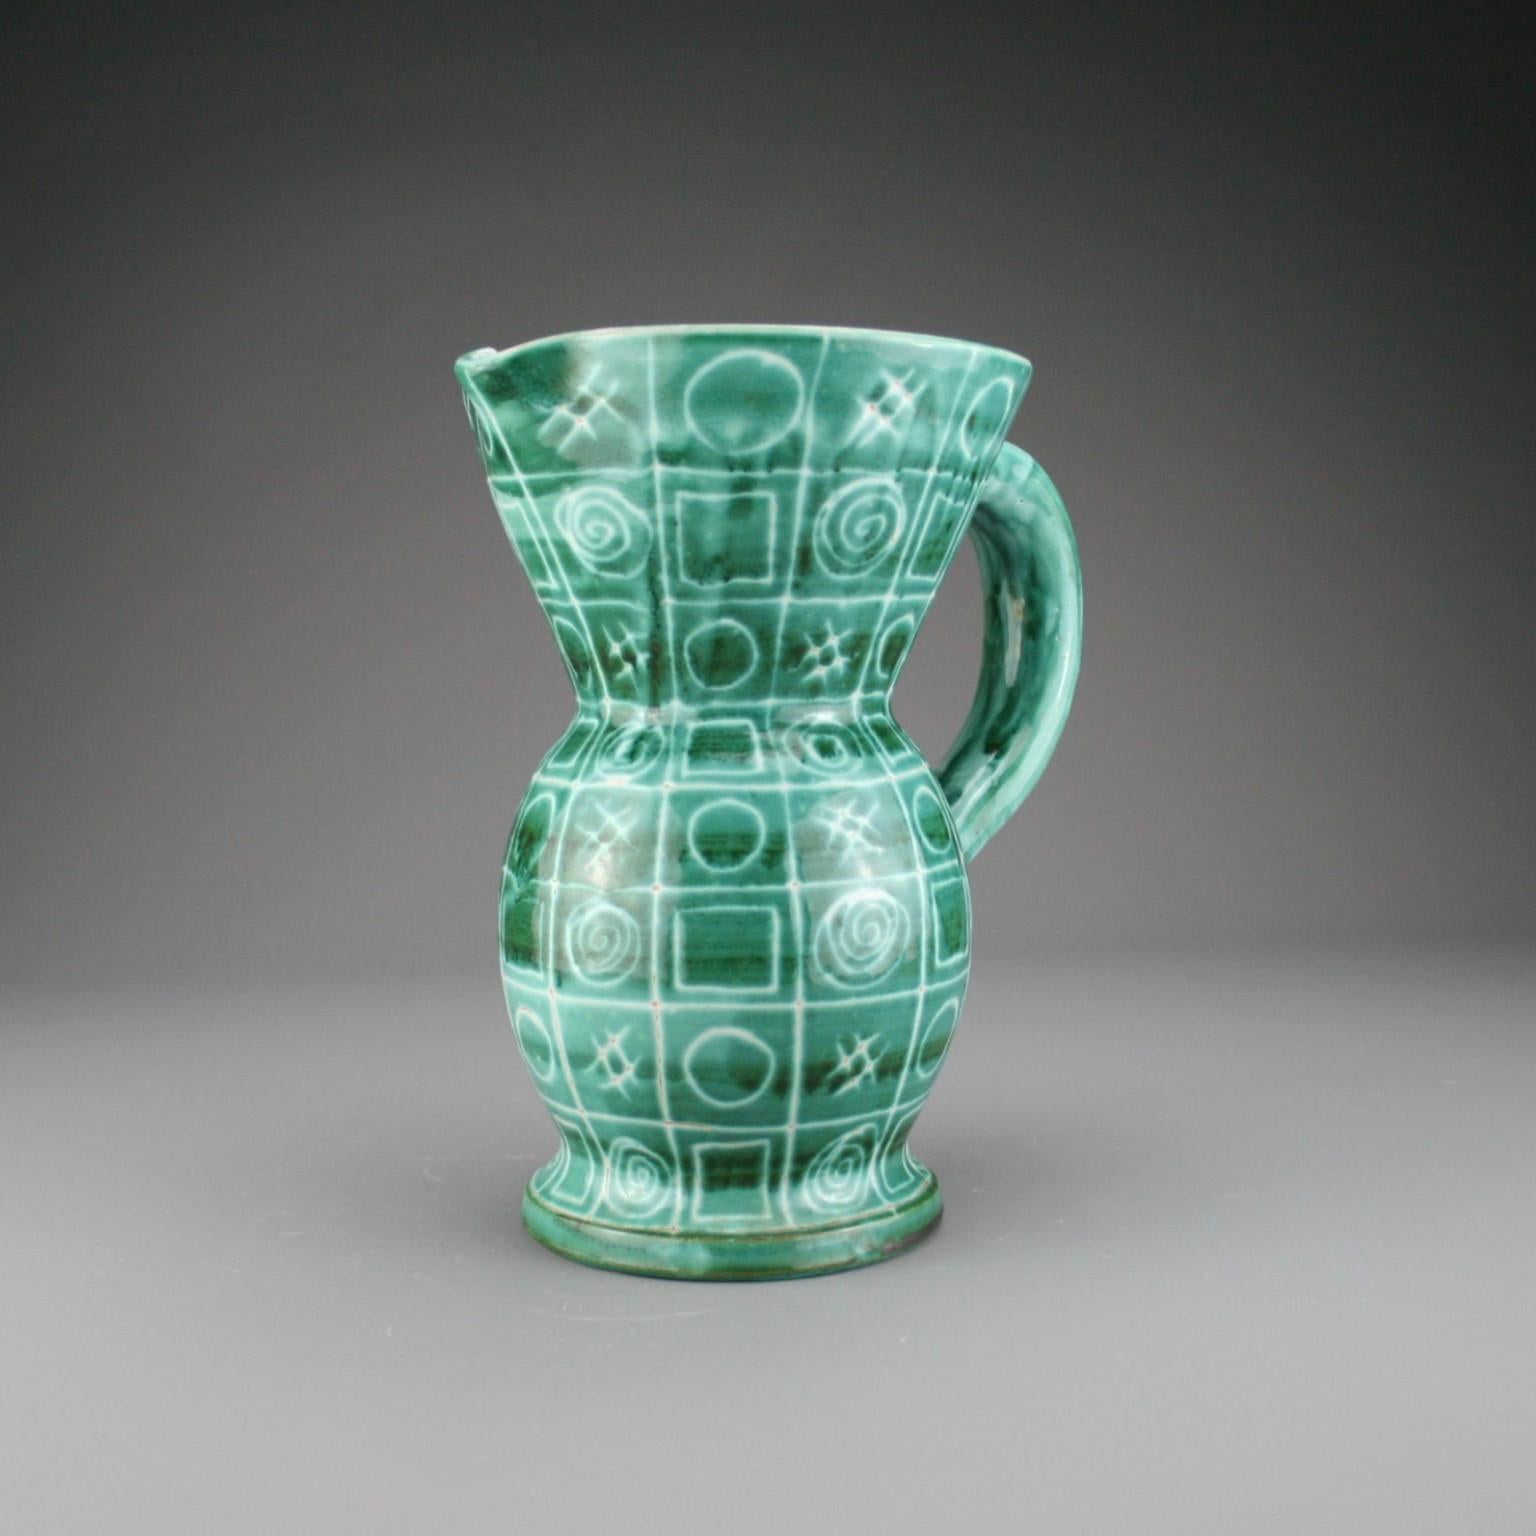 A large pitcher by Robert Picault and made in Vallauris in the South of France. The pitcher is hand decorated with a green glaze and white repeating patterned abstract design.

It has the painted initials RP to the unglazed base.

Robert Picault